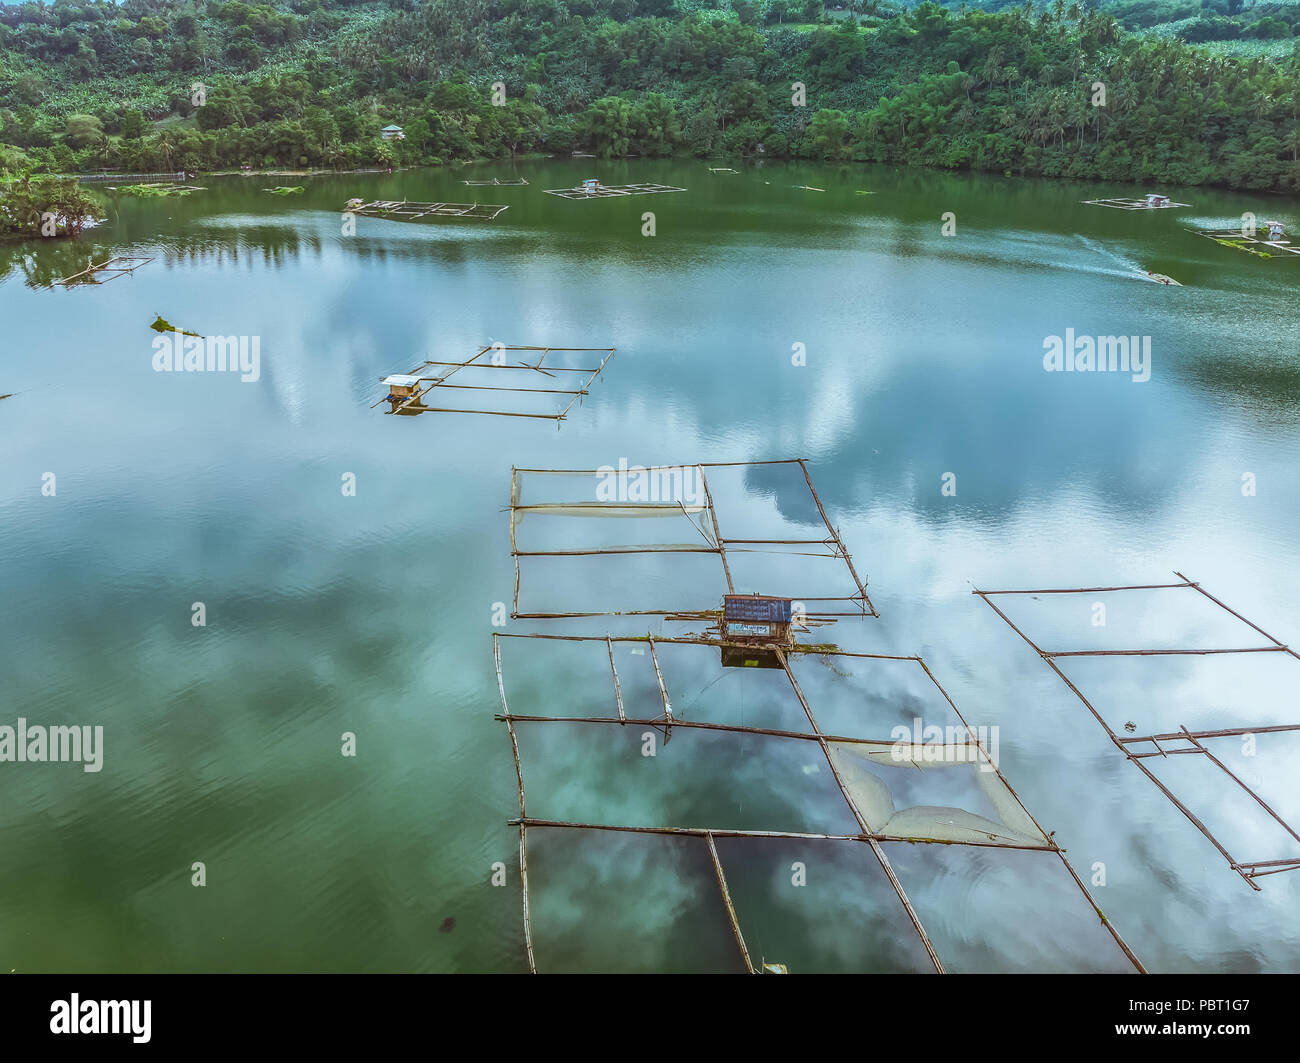 Bamboo rafts and the mountain background of Lake Mohicap, San Pablo City, Laguna, Philippines Stock Photo